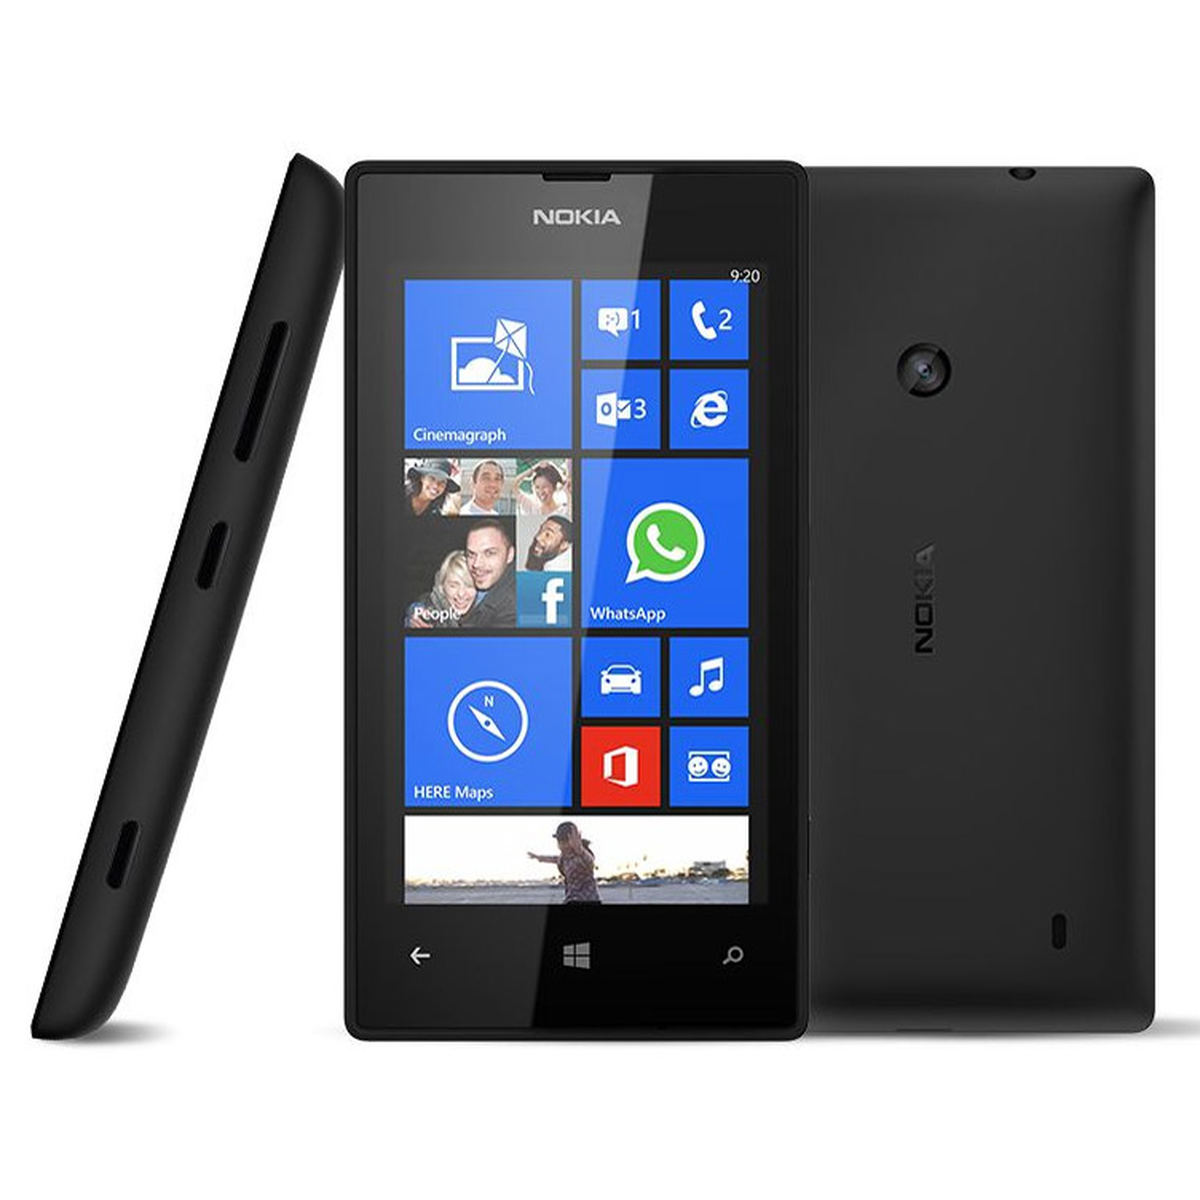 Nokia Lumia 520 : Specifications and Opinions | JuzaPhoto